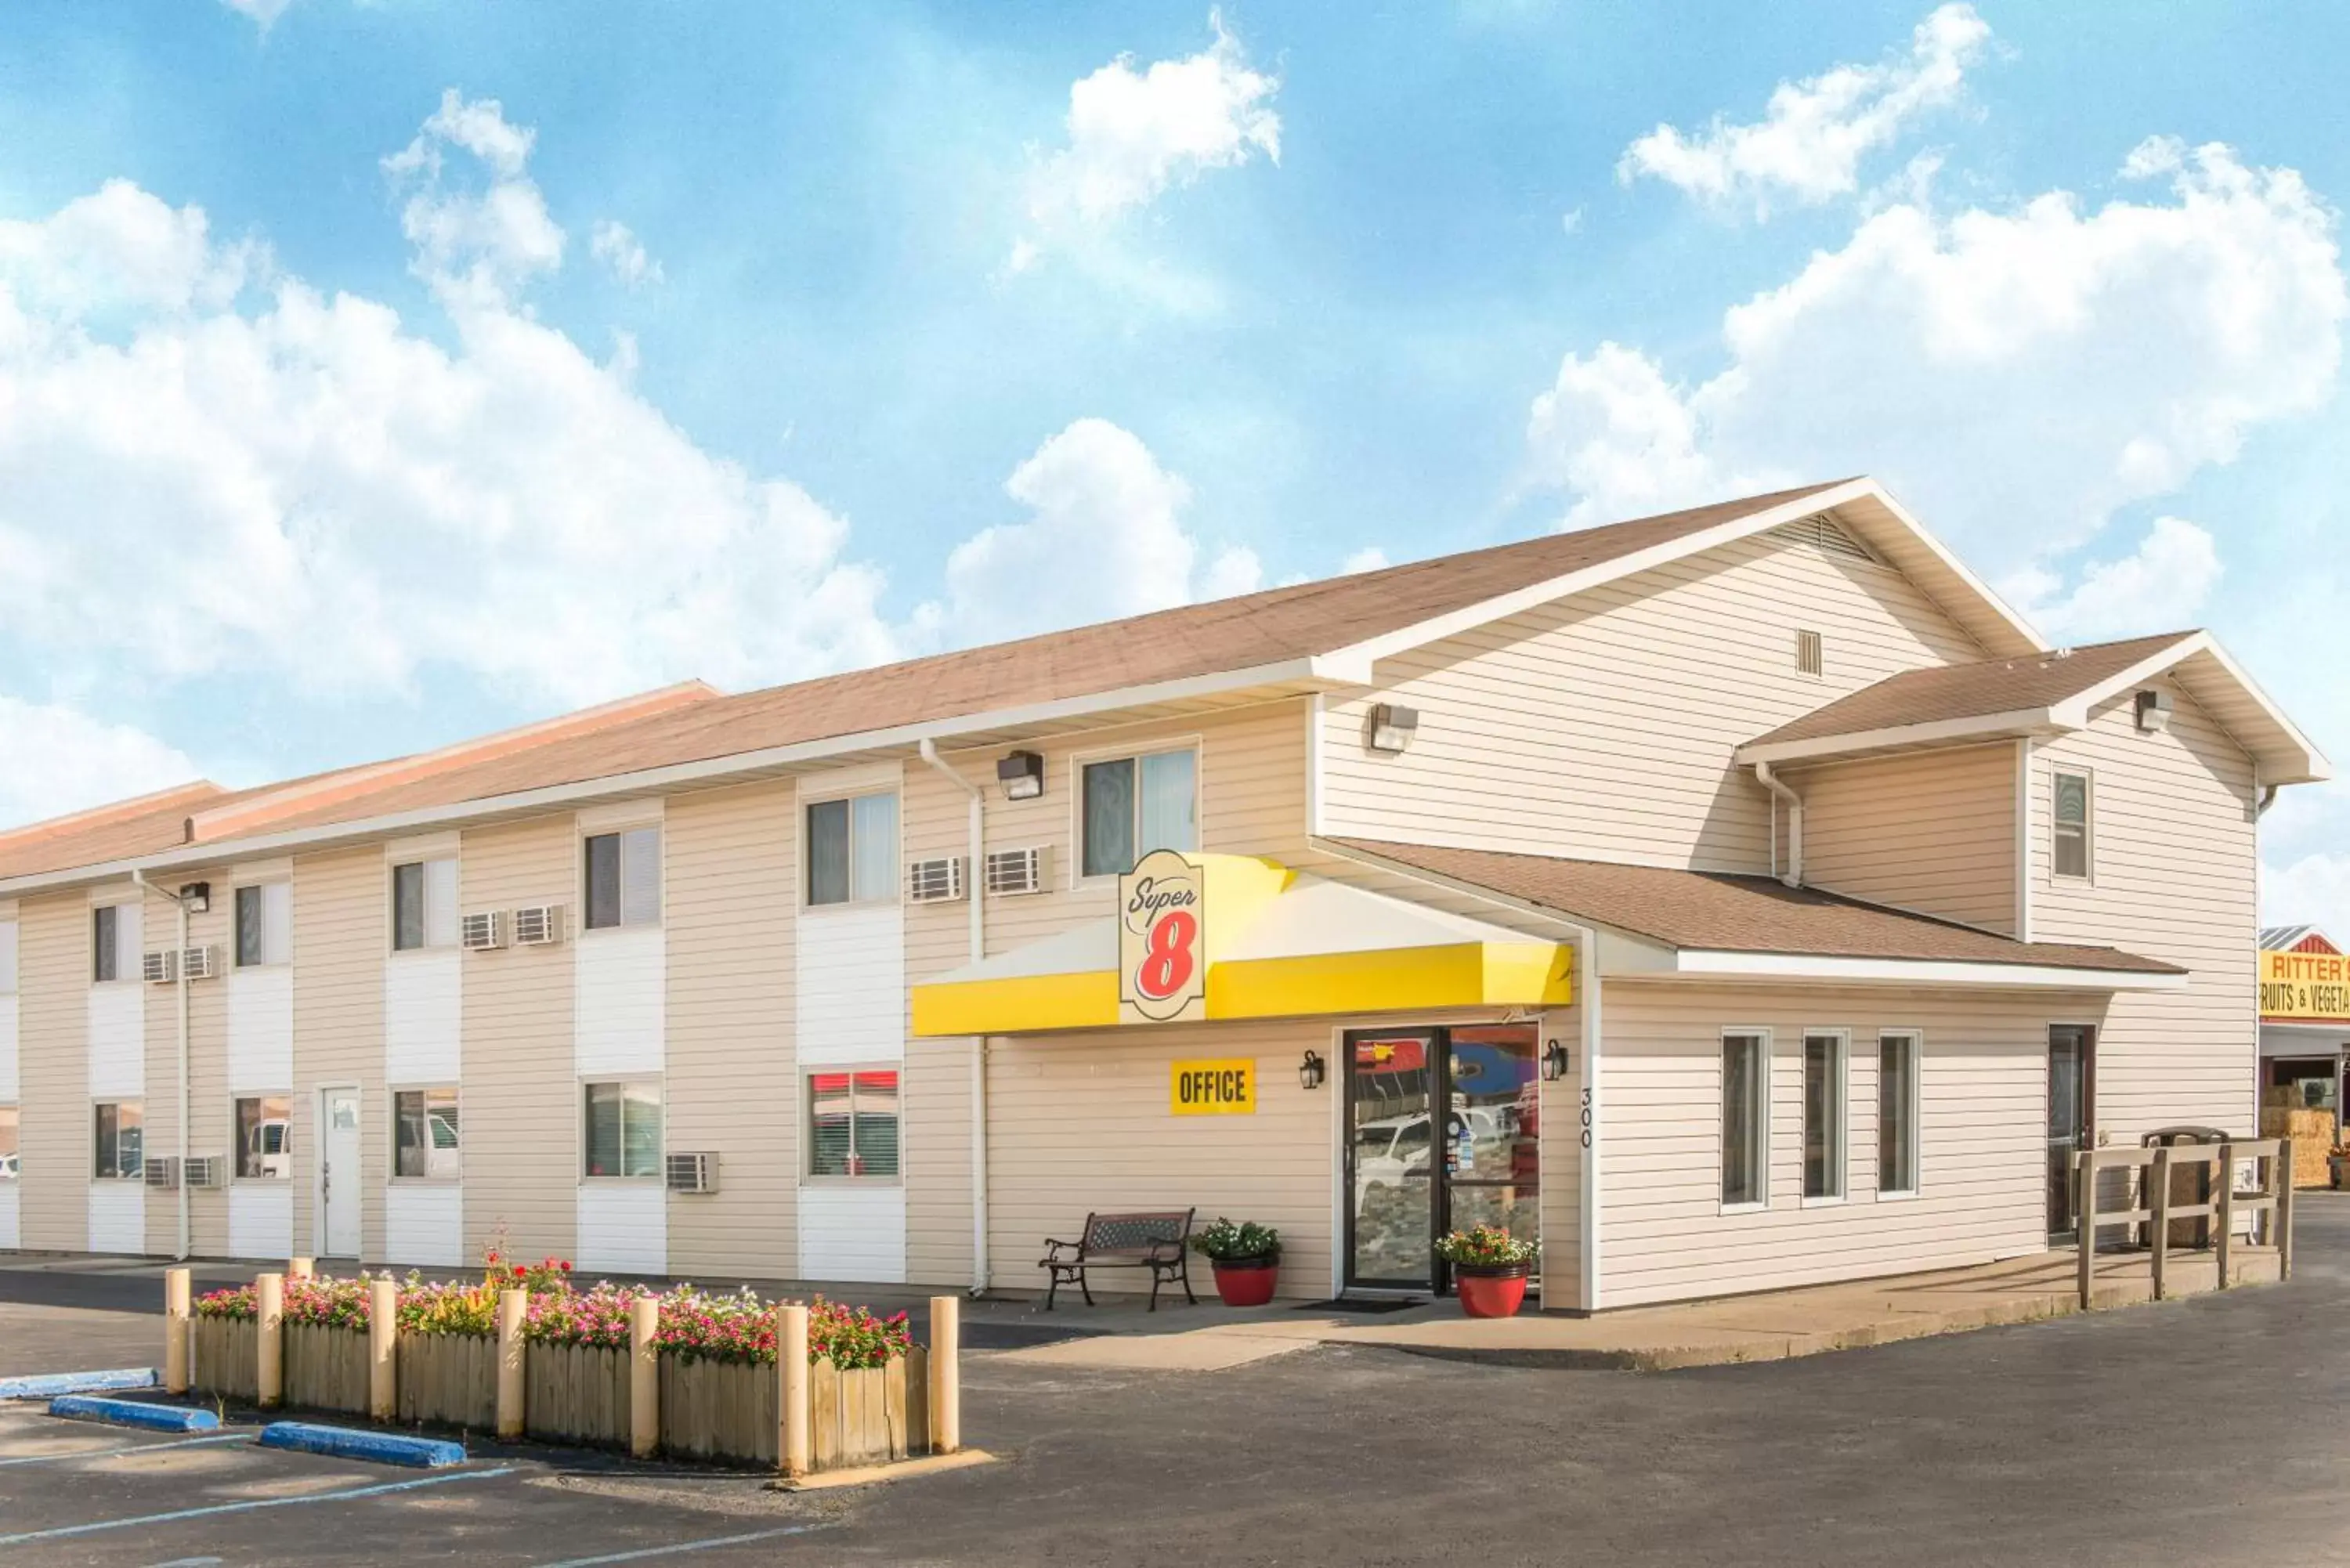 Property Building in Super 8 by Wyndham Moberly MO